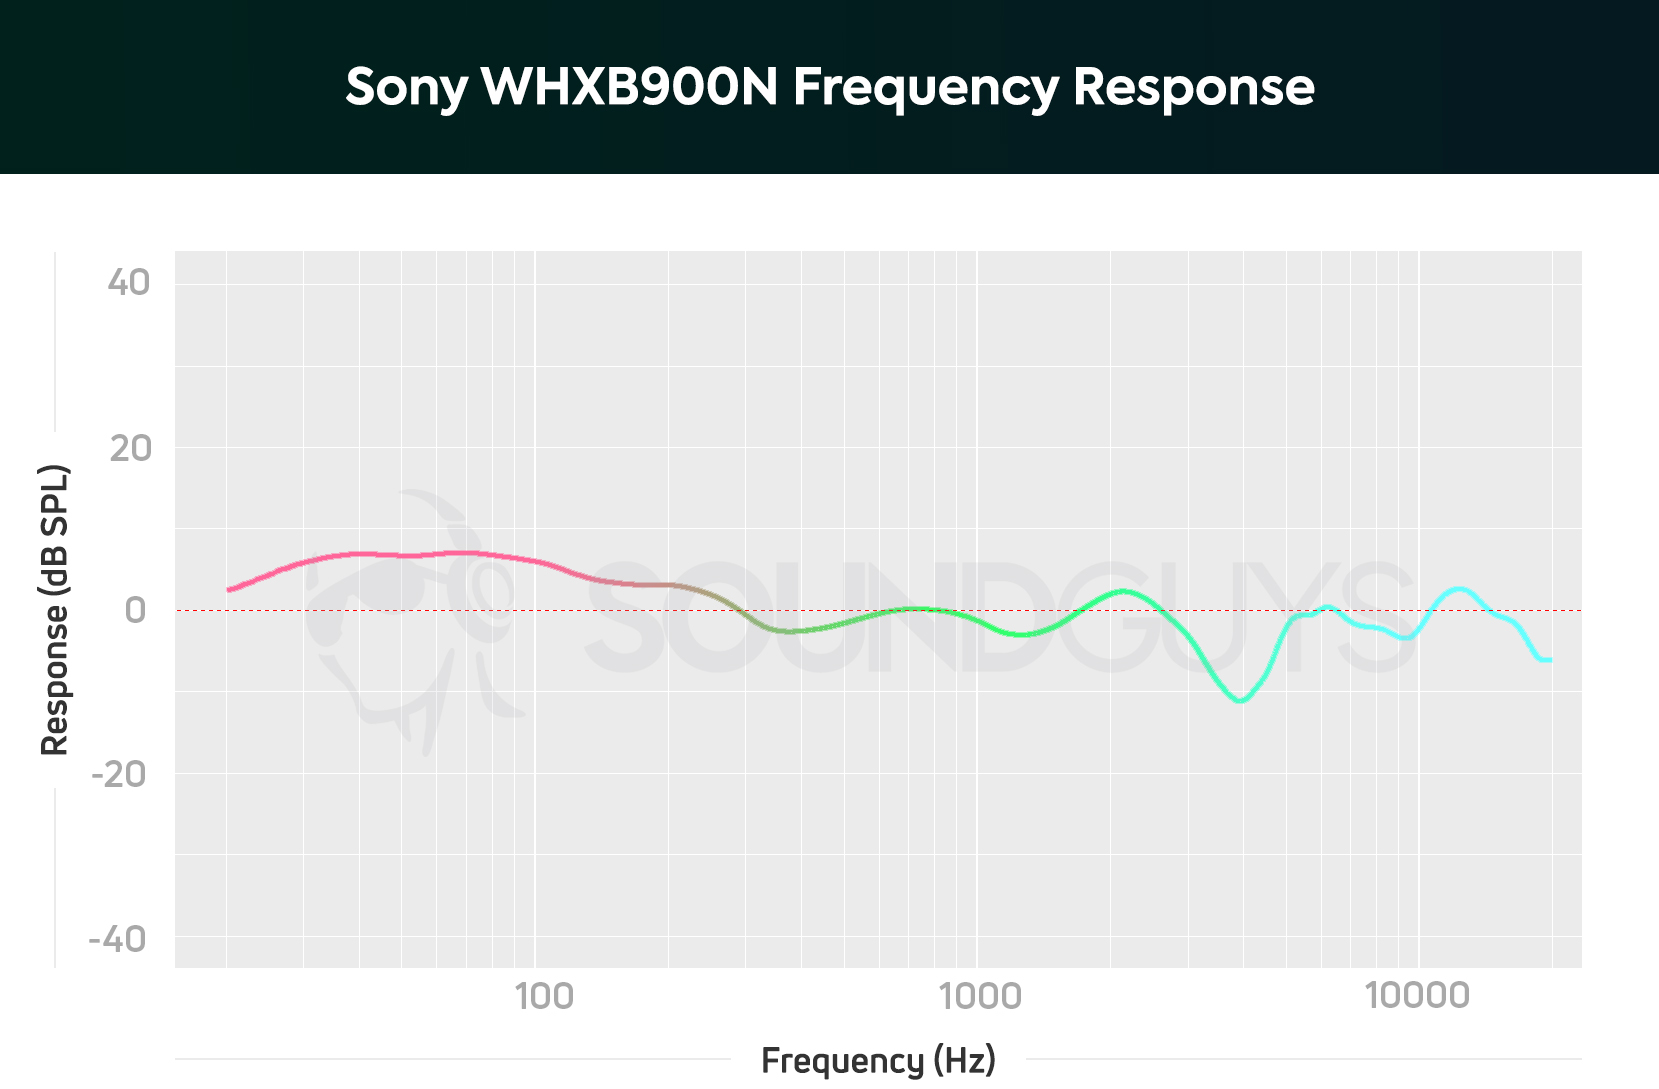 Frequency response graph of the Sony WH-XB900N headphones.